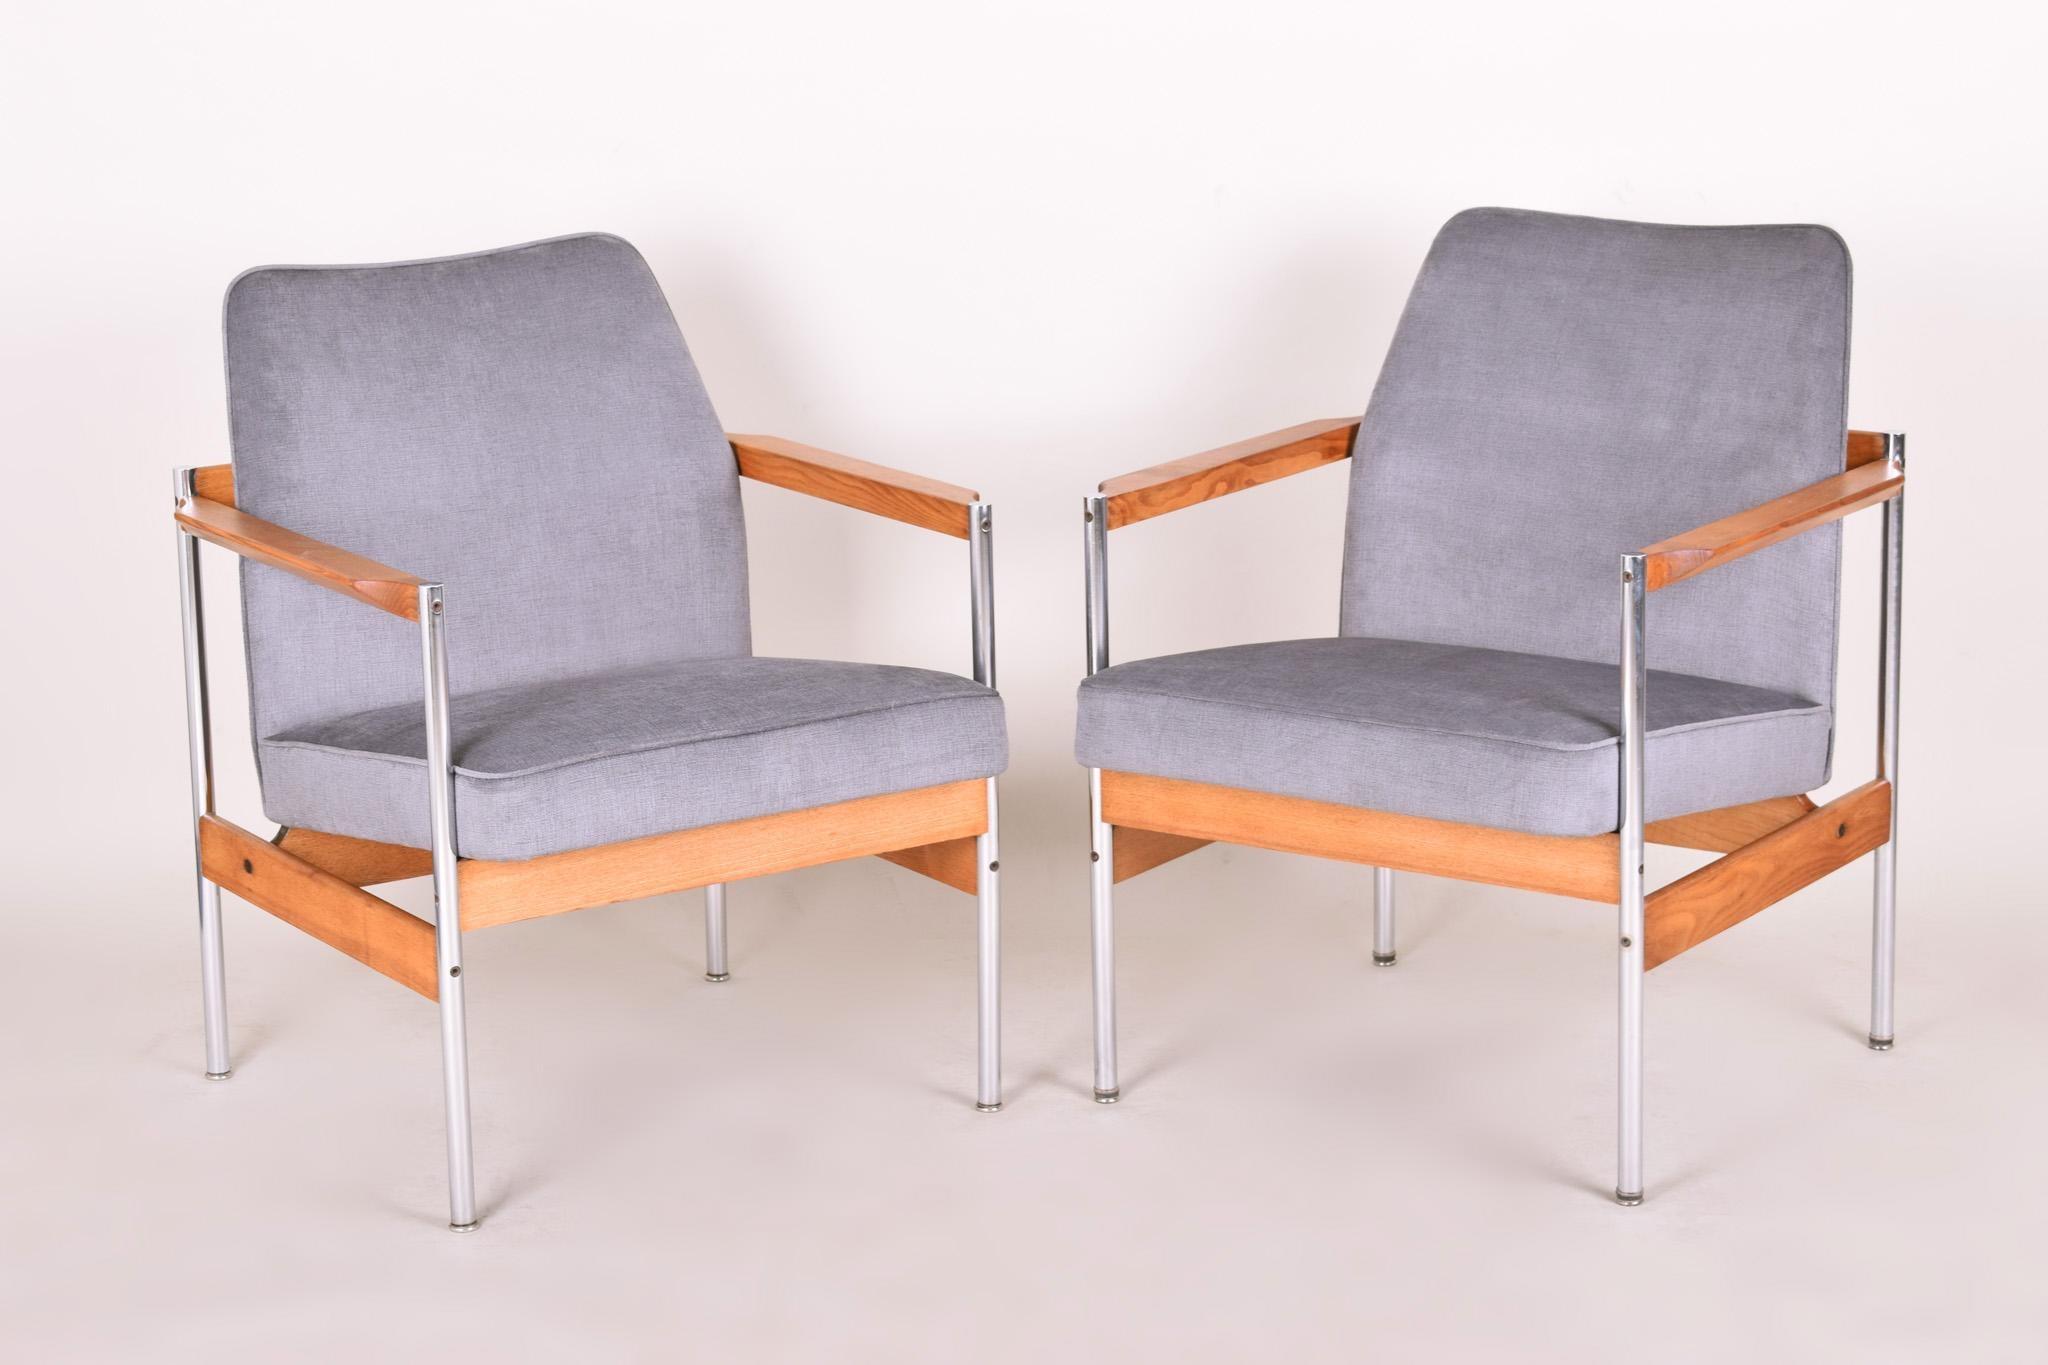 Pair of armchairs, midcentury.
Completely restored. New fabric and upholstery, period 1970-1979.

We guarantee safe a the cheapest air transport from Europe to the whole world within 7 days.
The price is the same as for ship transport but